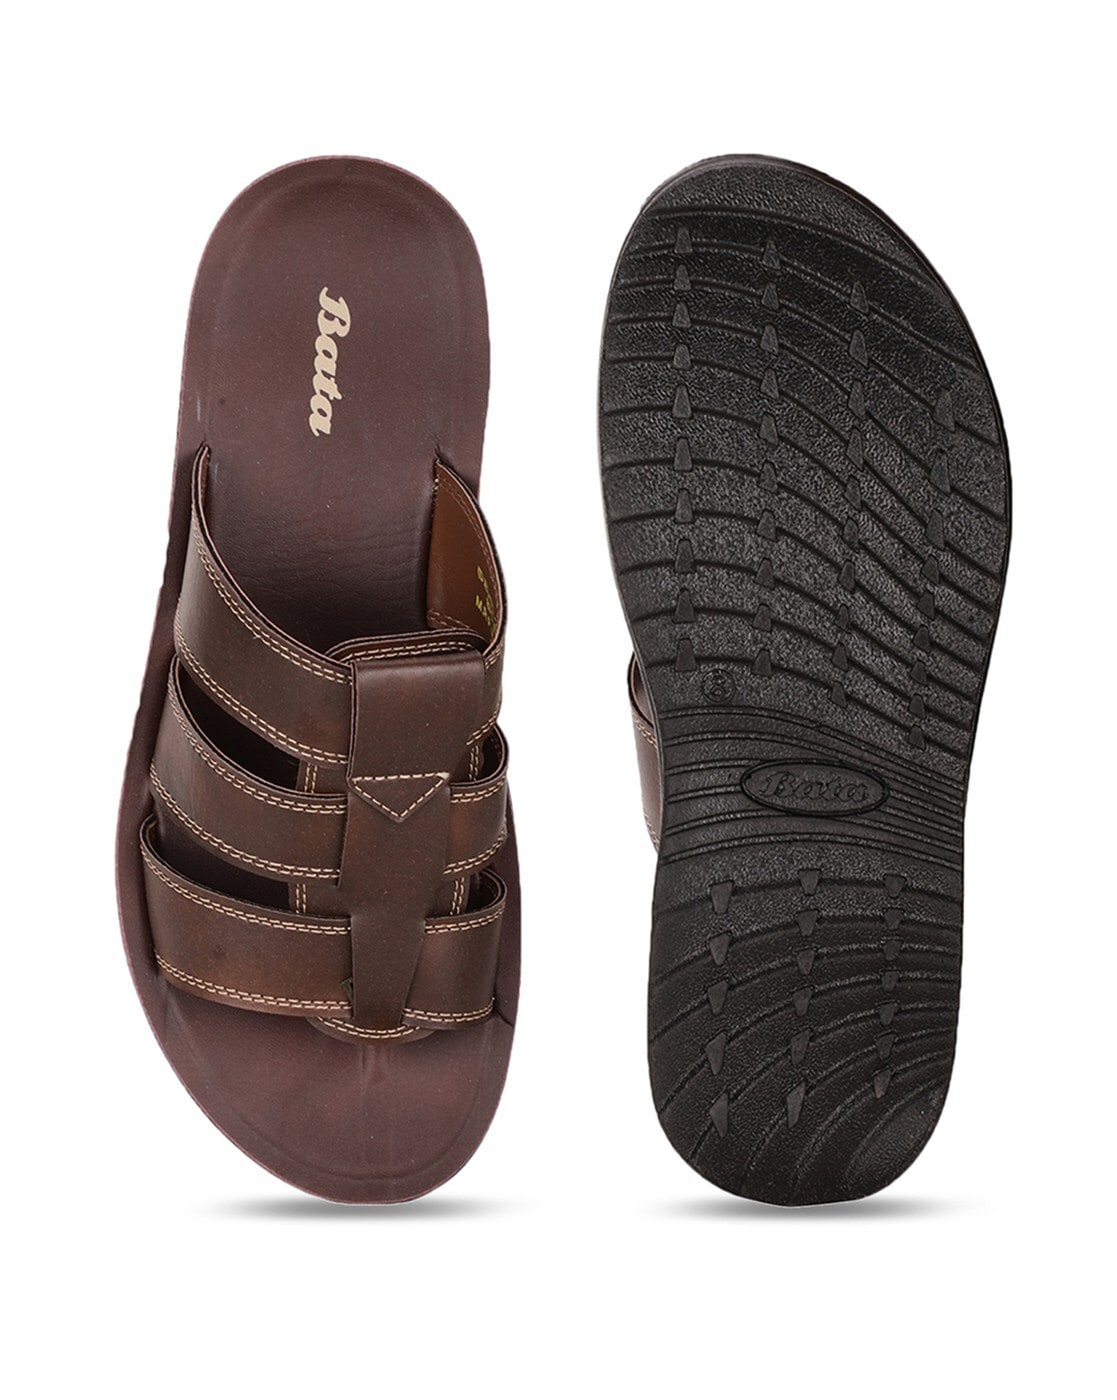 Which Indian brand produce the best shoes and sandals at an affordable  price? - Quora